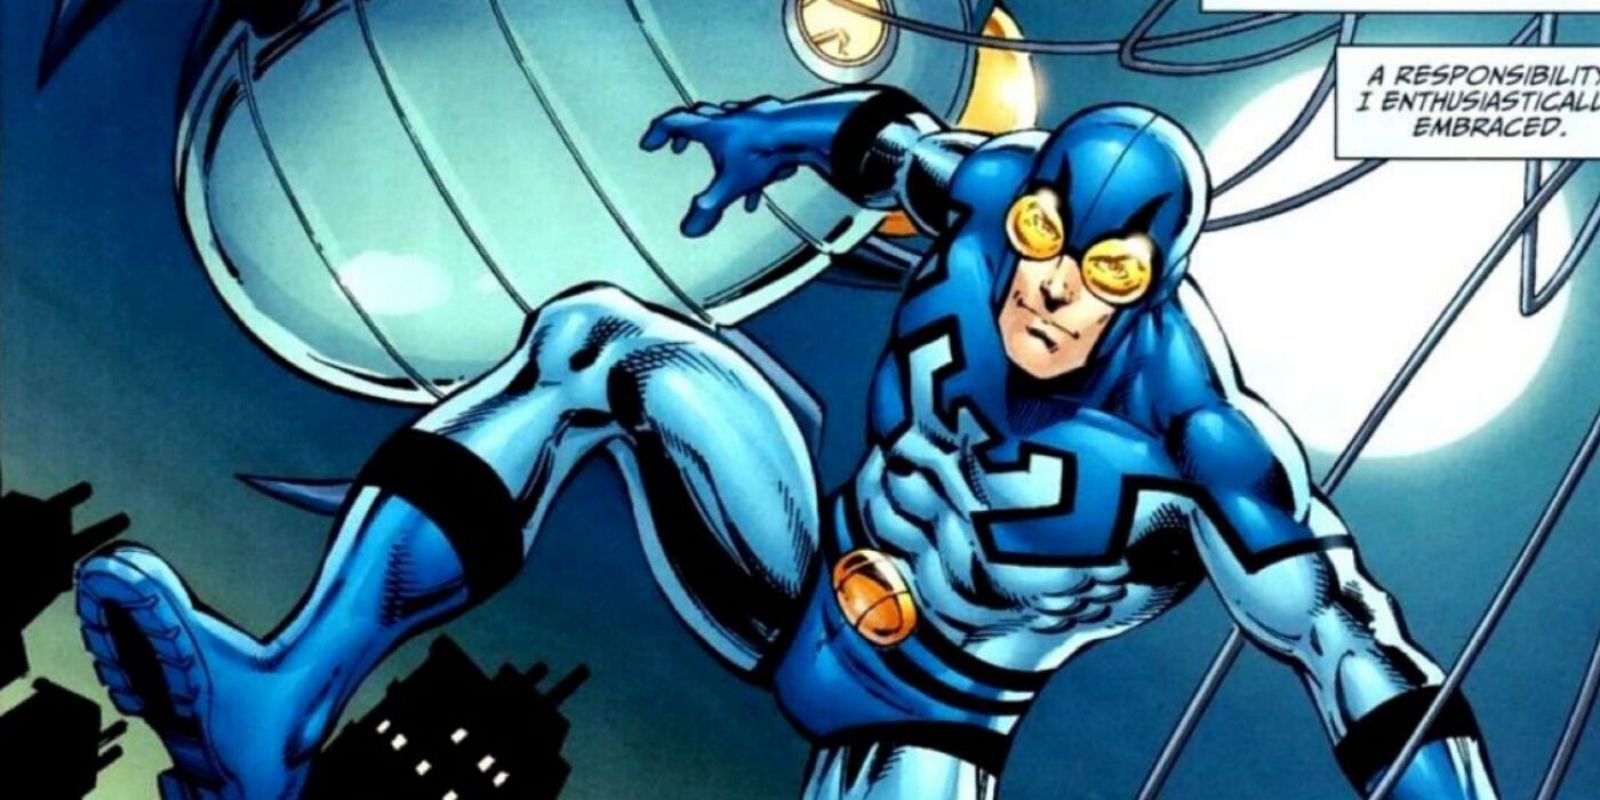 Ted Kord as Blue Beetle jumping into the night in Marvel comics